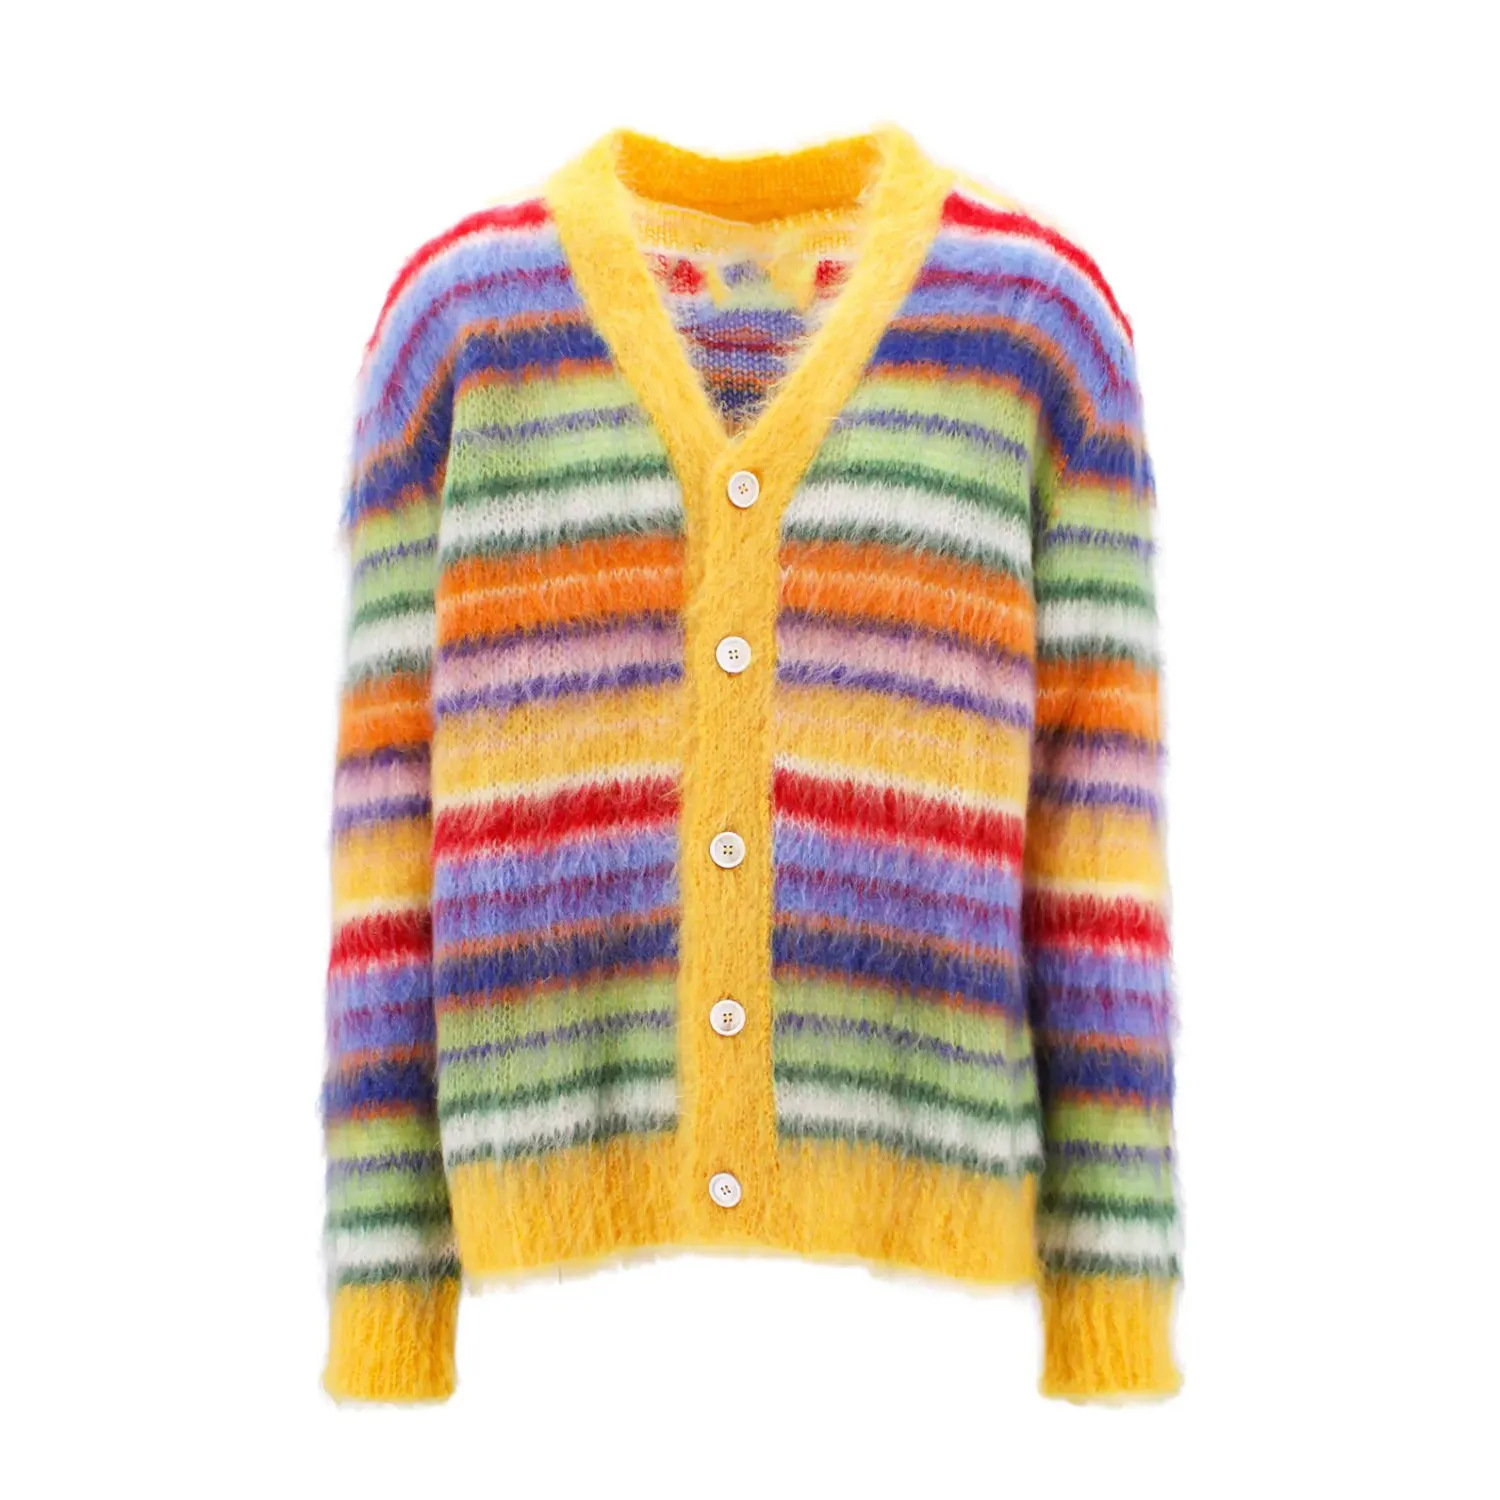 OEM/ODM Winter High Quality Custom LOGO Fuzzy Color Striped Mohair Knit V Neck Wool Cardigan Men's Sweater